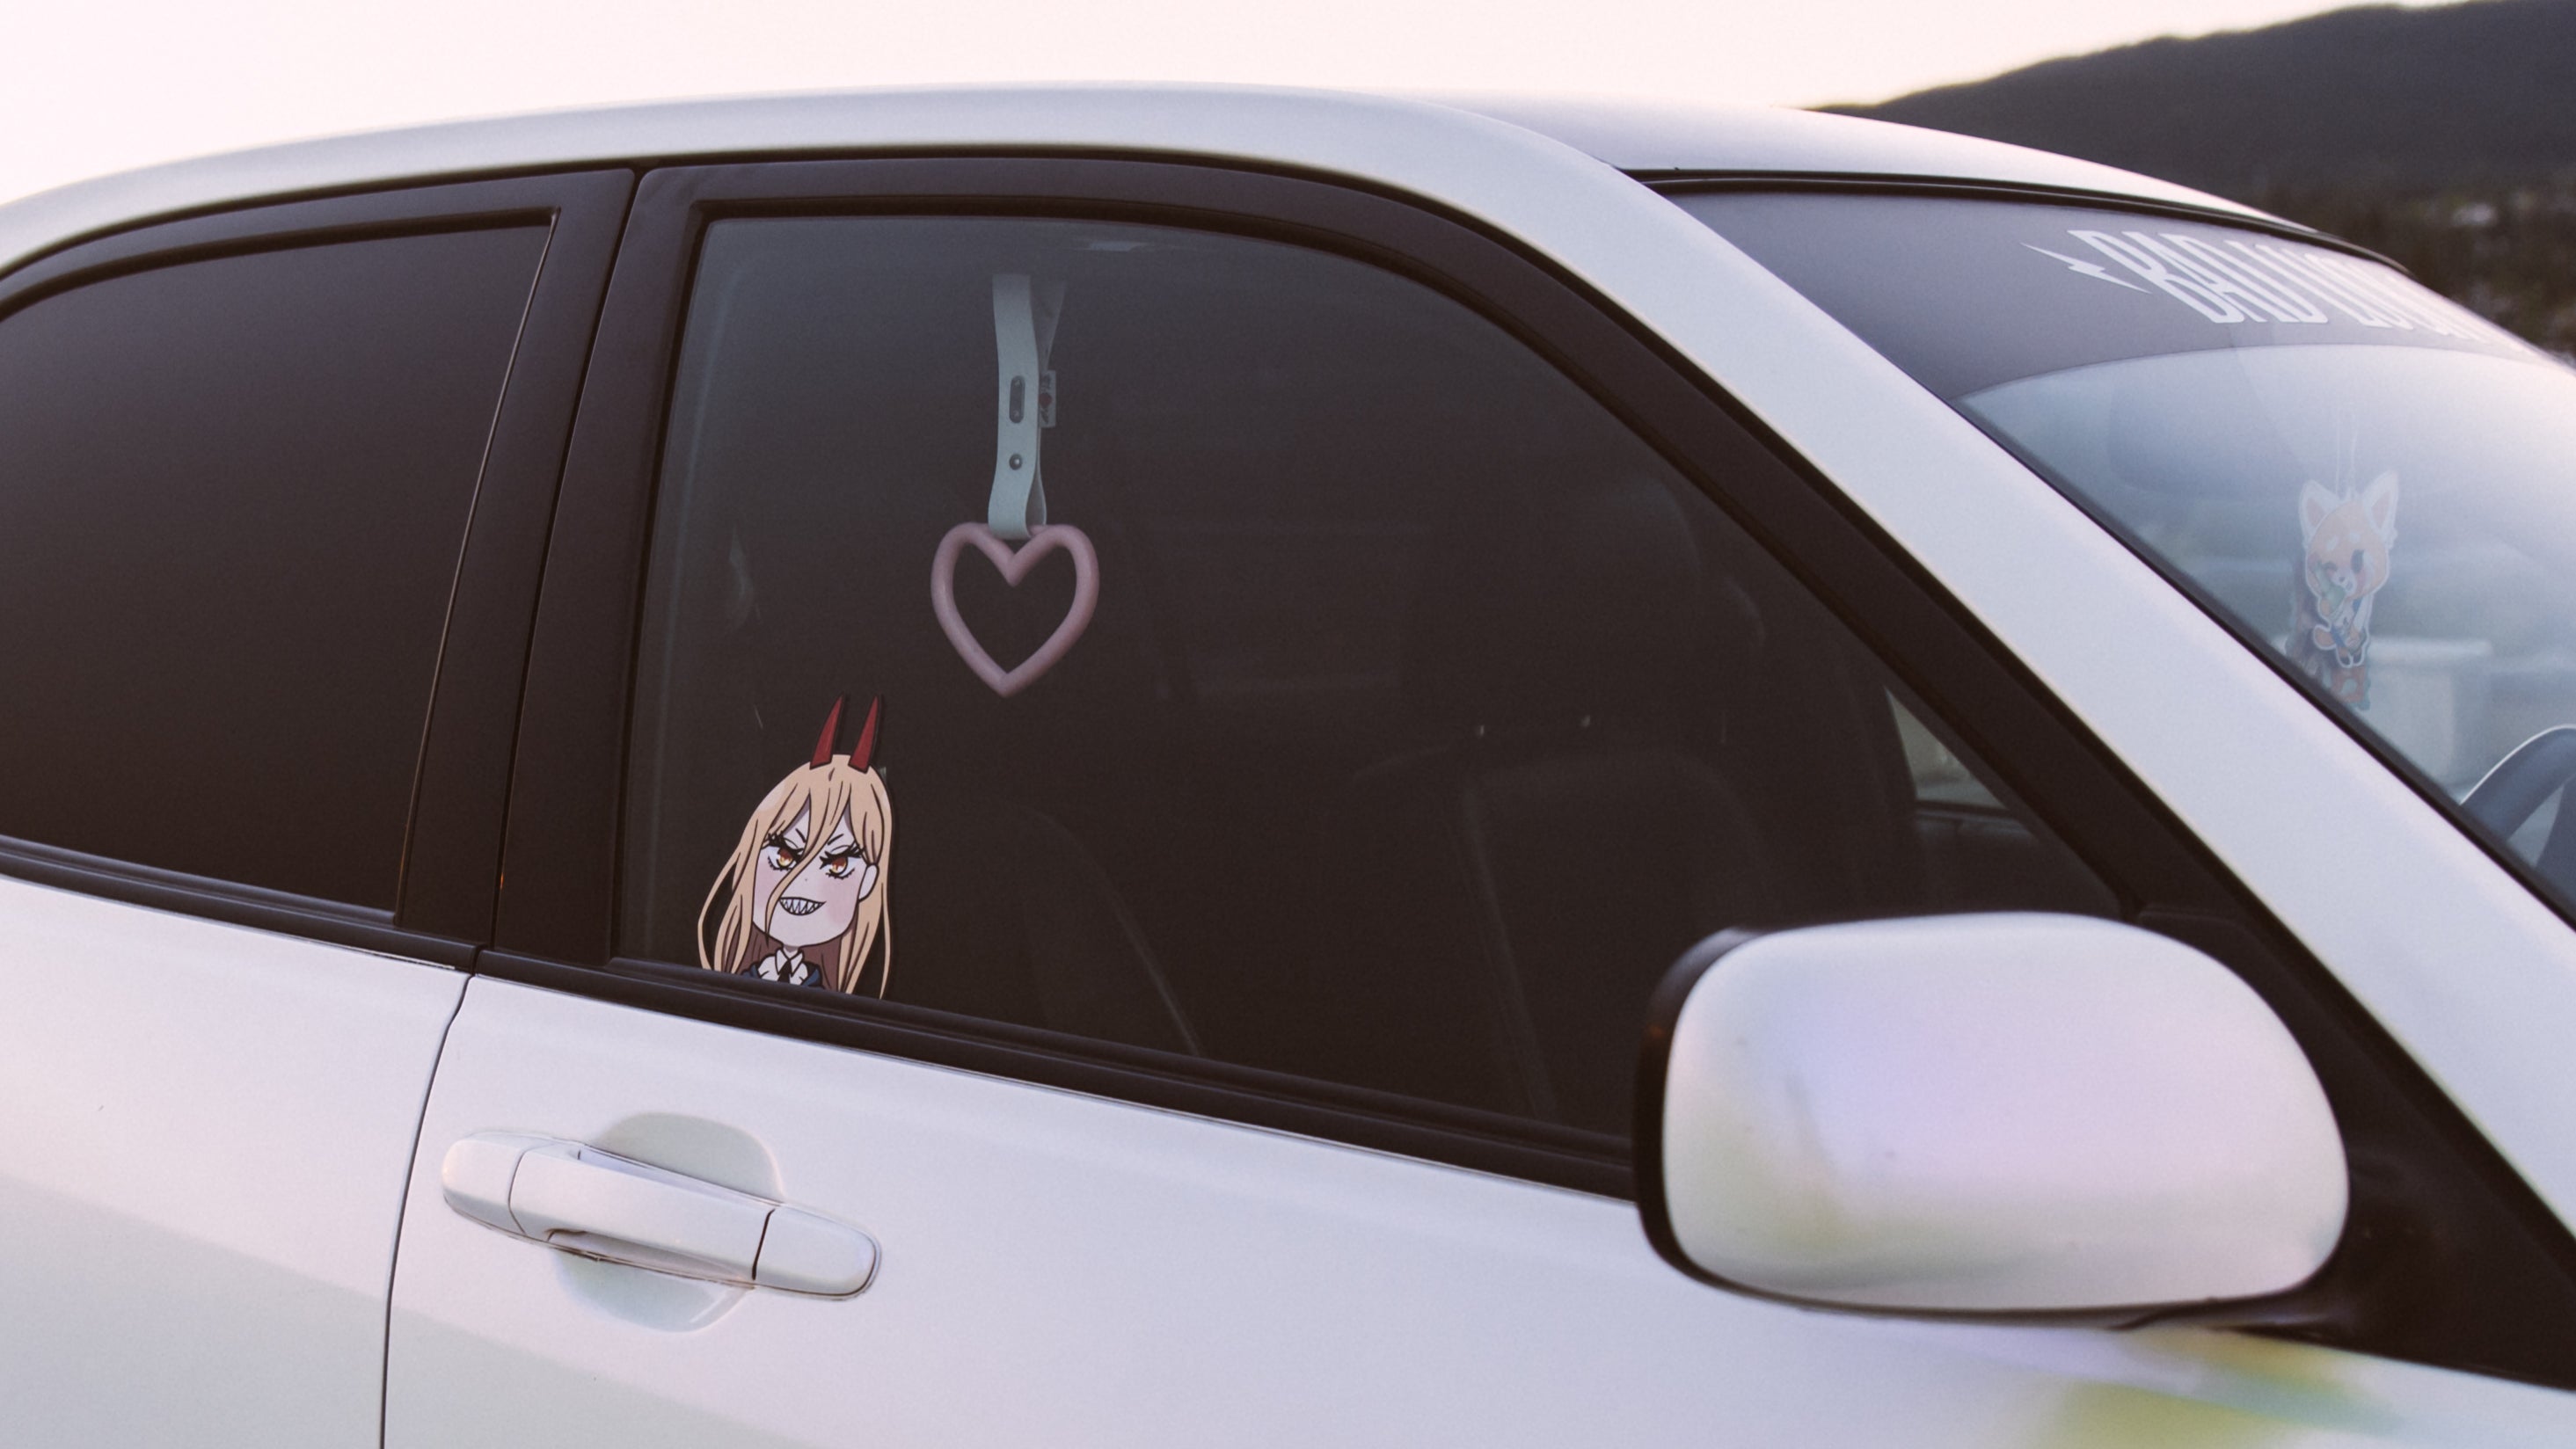 power from chainsaw man peeking sticker with a heart JDM tsurikawa and a aggretsuko air freshener hanging in the background